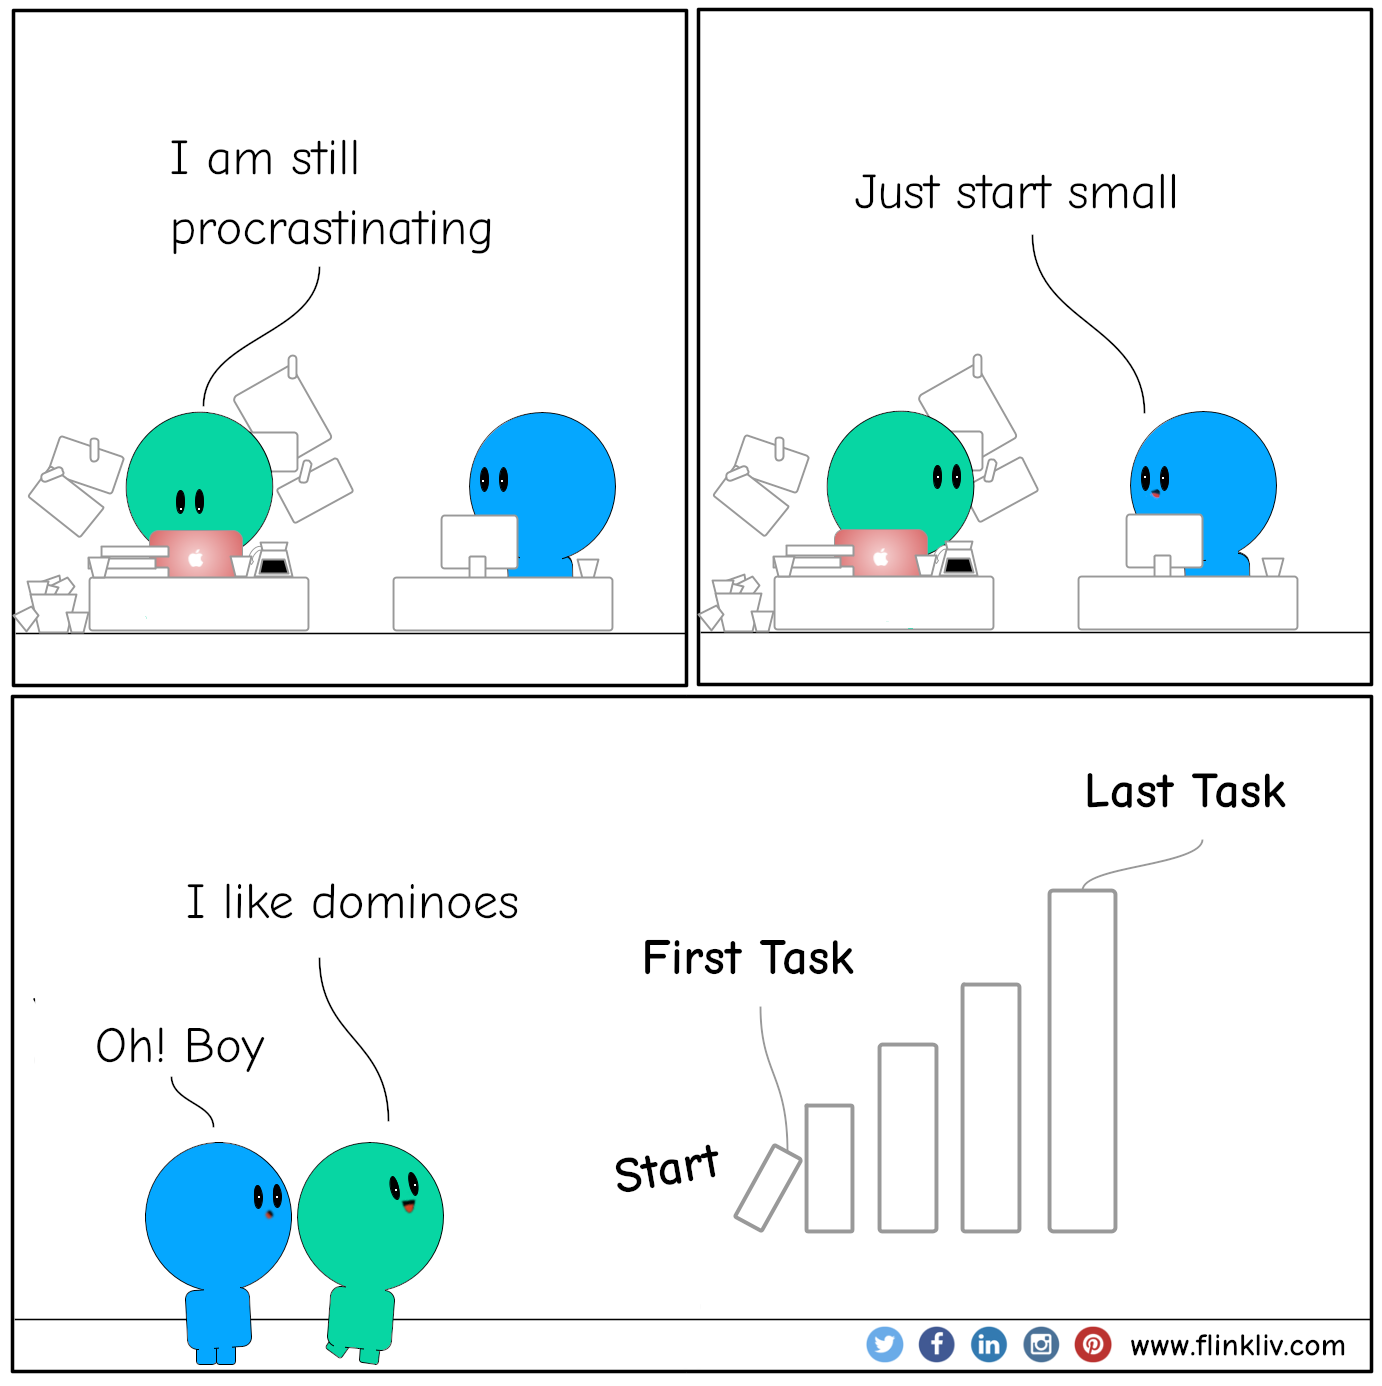 Conversation between A and B about to just start small to fight procrastination.
					        A: I am still procrastinating
					        B: Just start small
								By flinkliv.com
					    